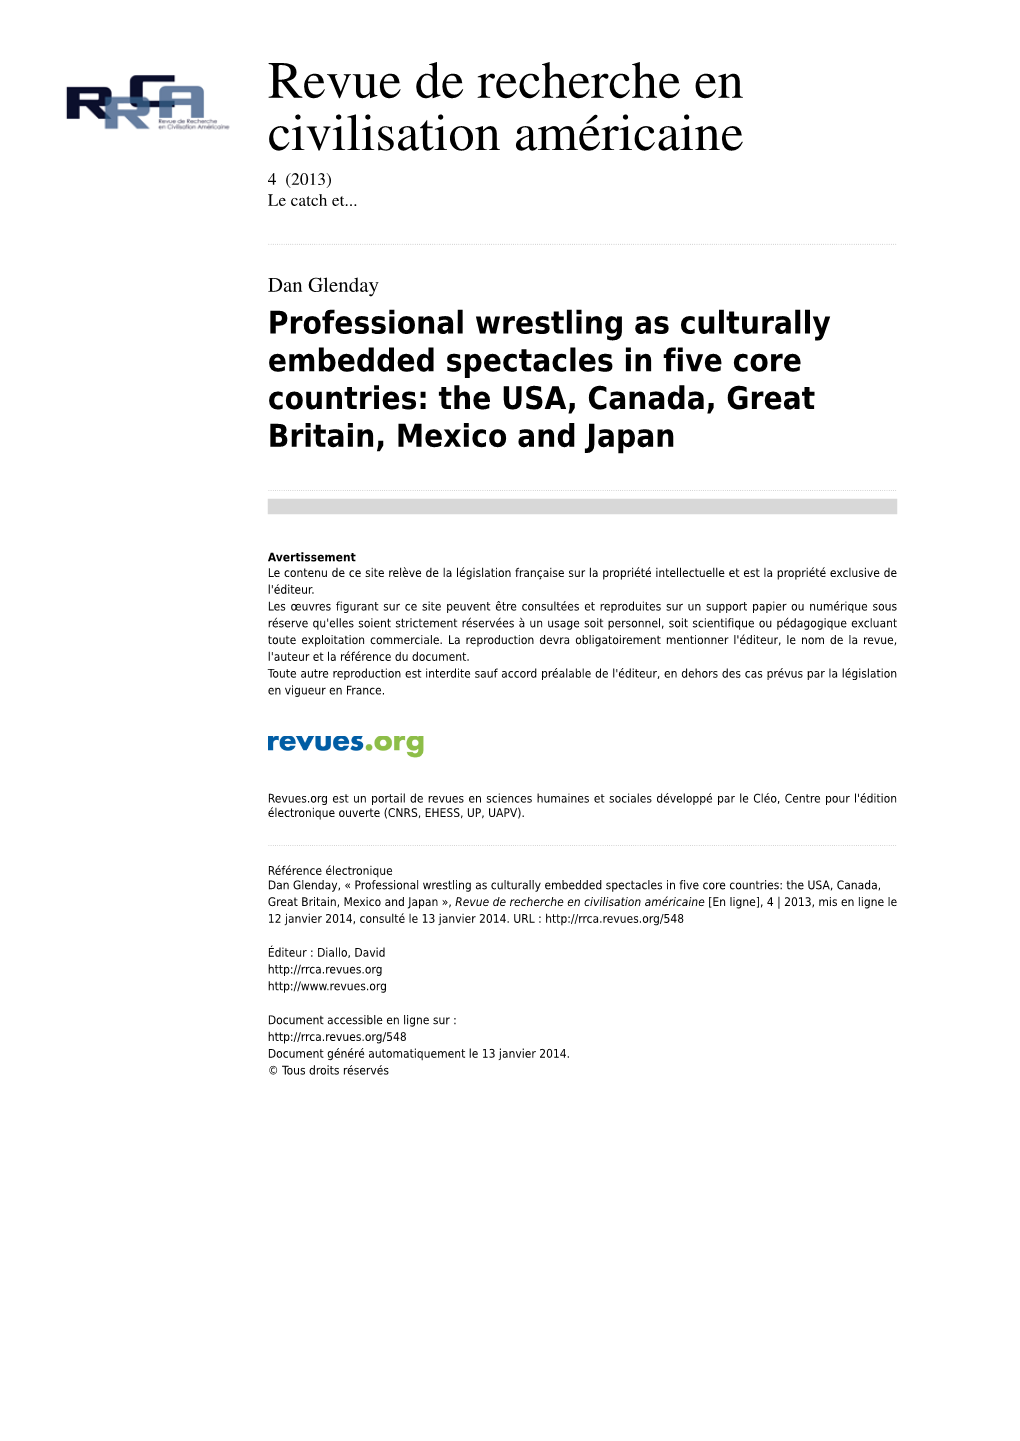 Professional Wrestling As Culturally Embedded Spectacles in Five Core Countries: the USA, Canada, Great Britain, Mexico and Japan